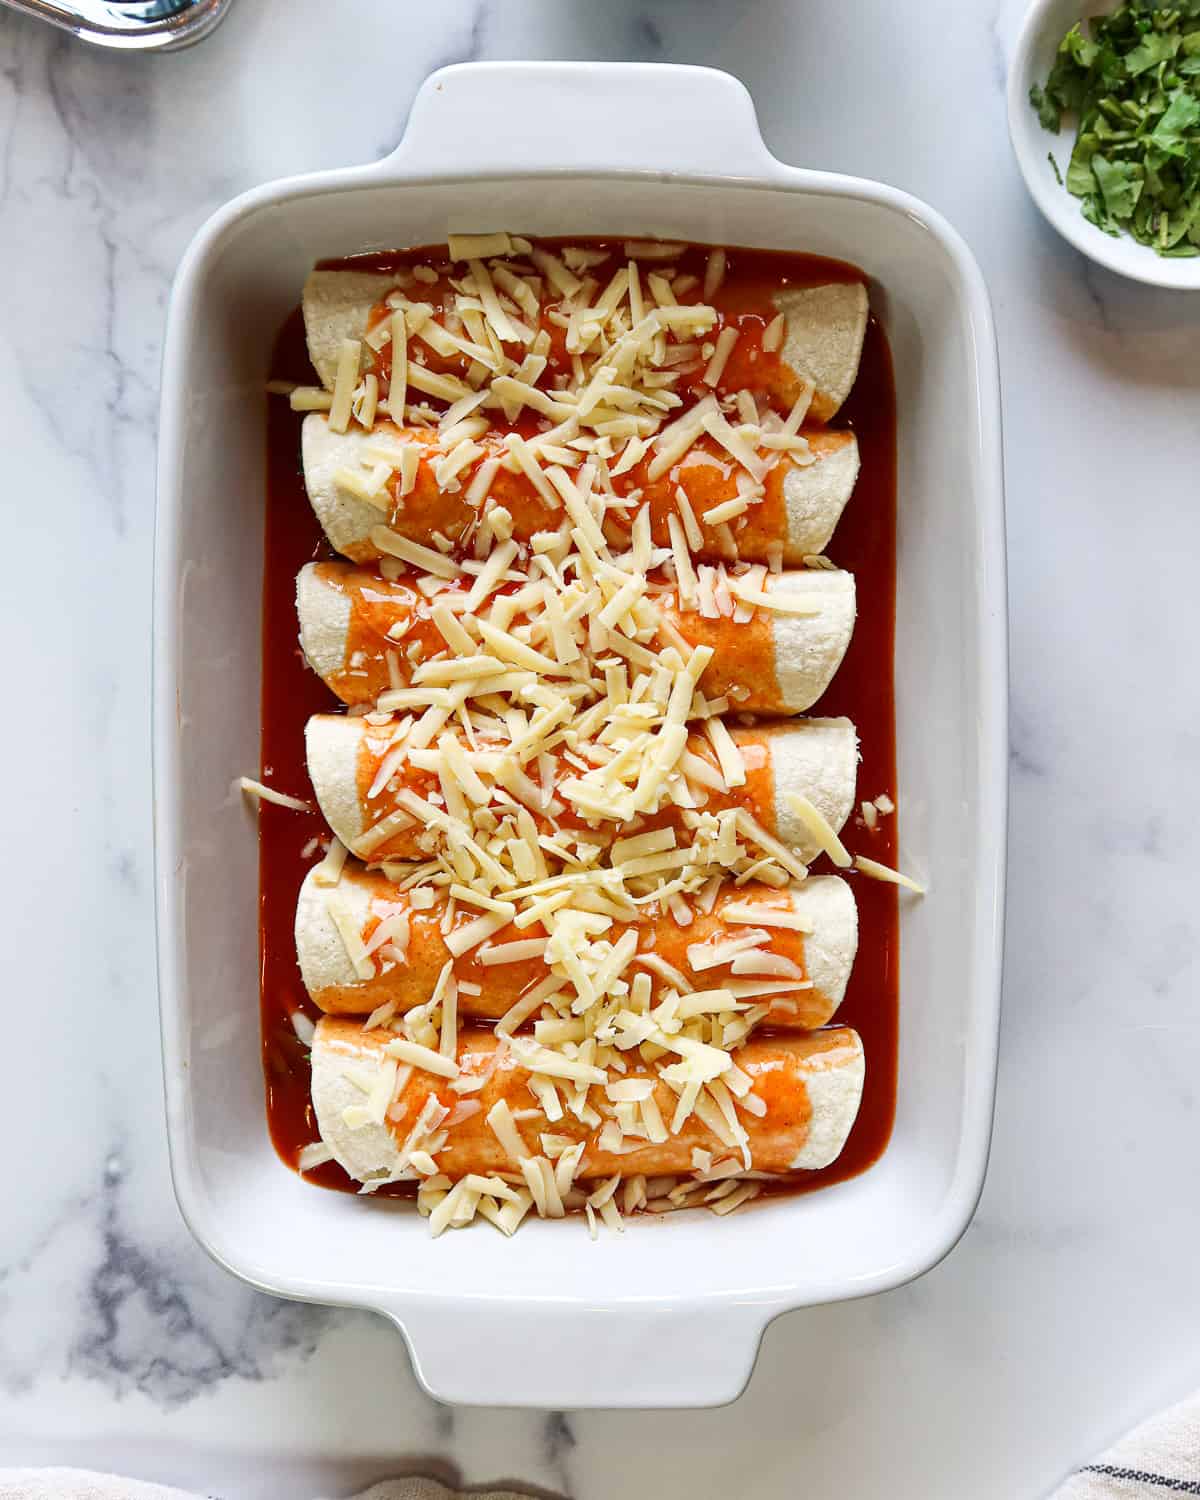 Enchiladas lined in a baking dish and covered in red sauce and shredded cheese.